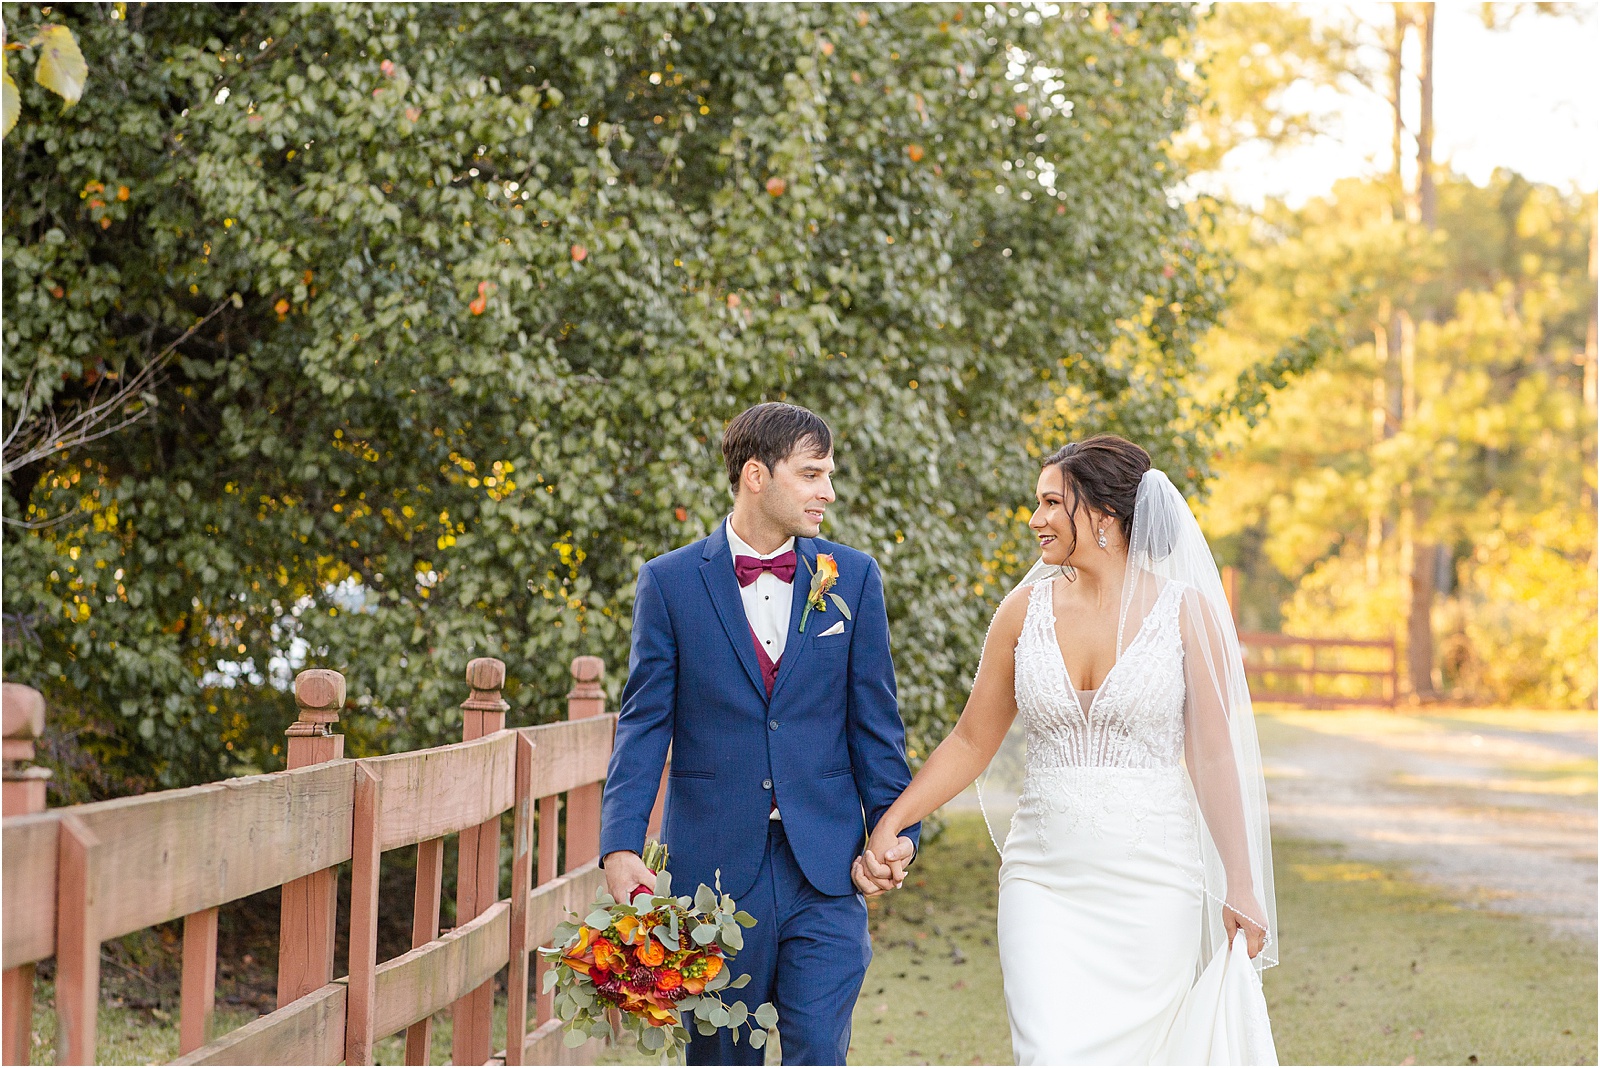 groom looks at bride as they walk along barn fence